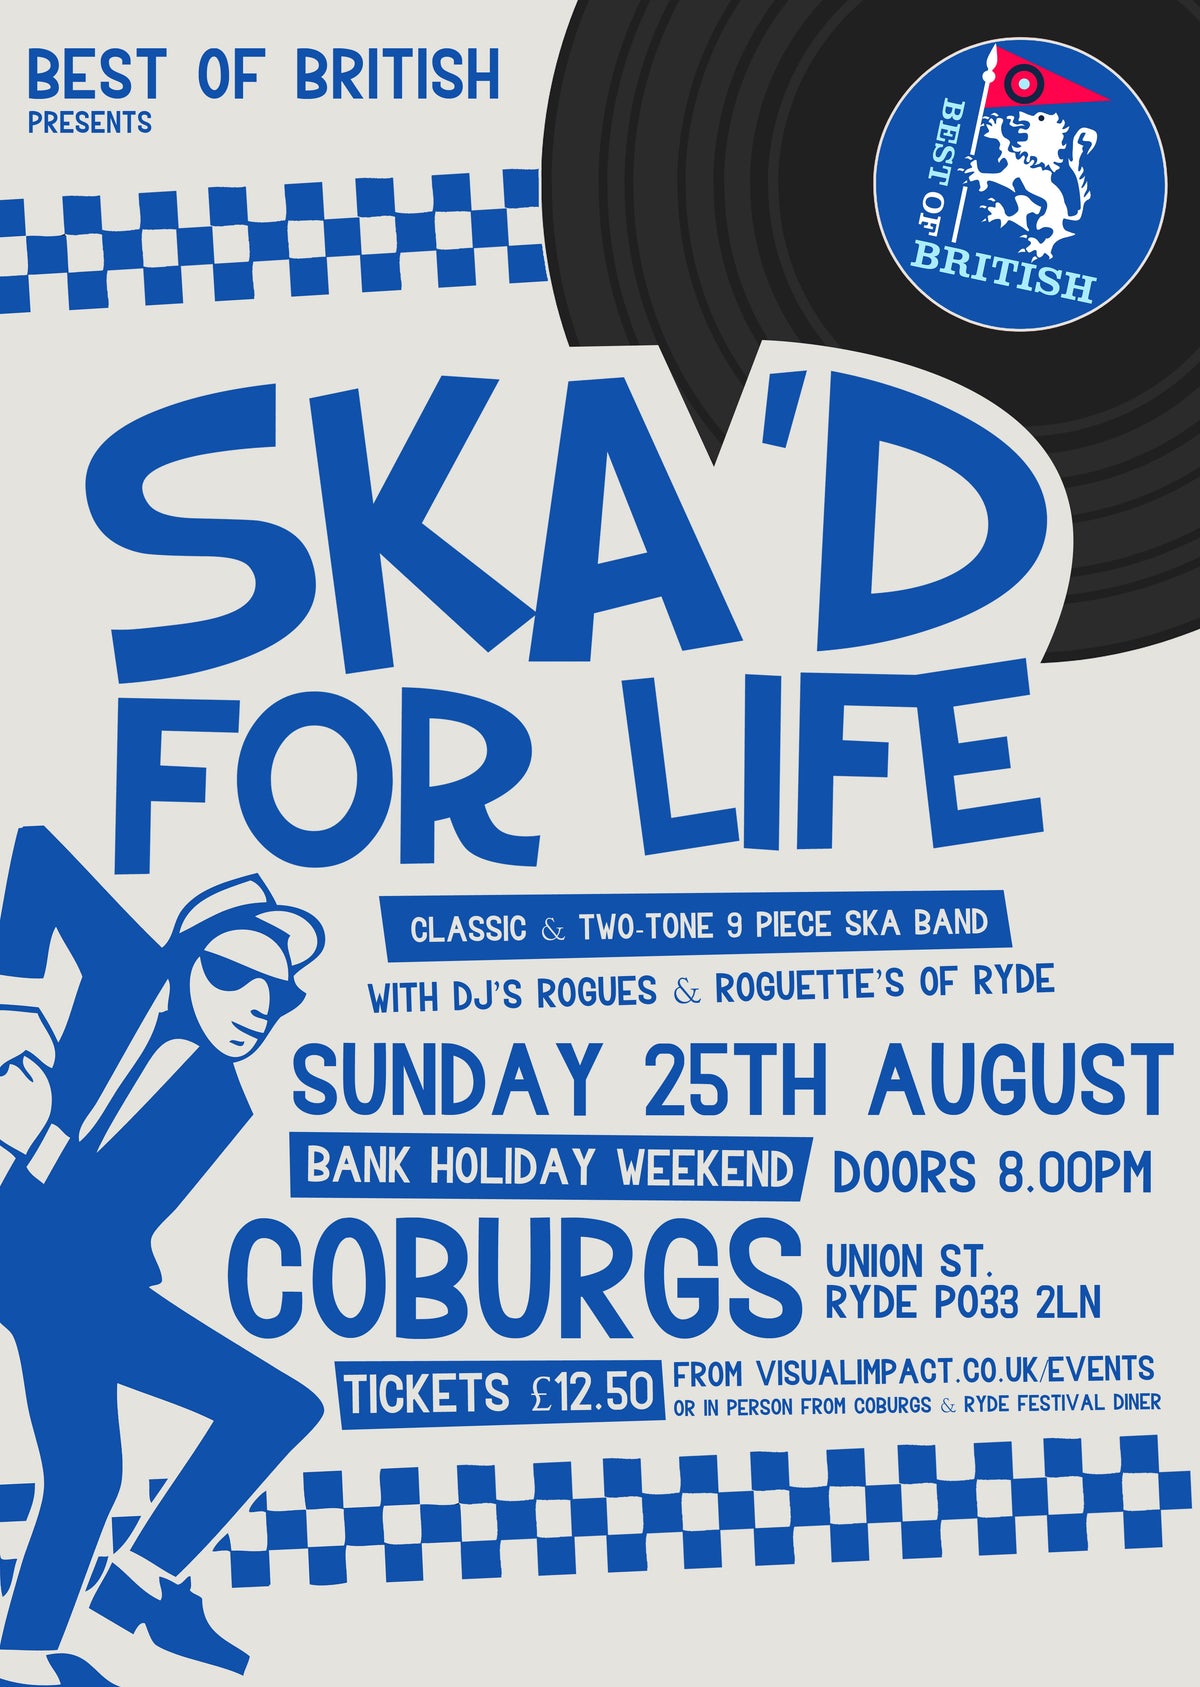 Ska'd for Life @ Coburgs Union St, Ryde - Sunday 25th August - IOW Scooter Rally